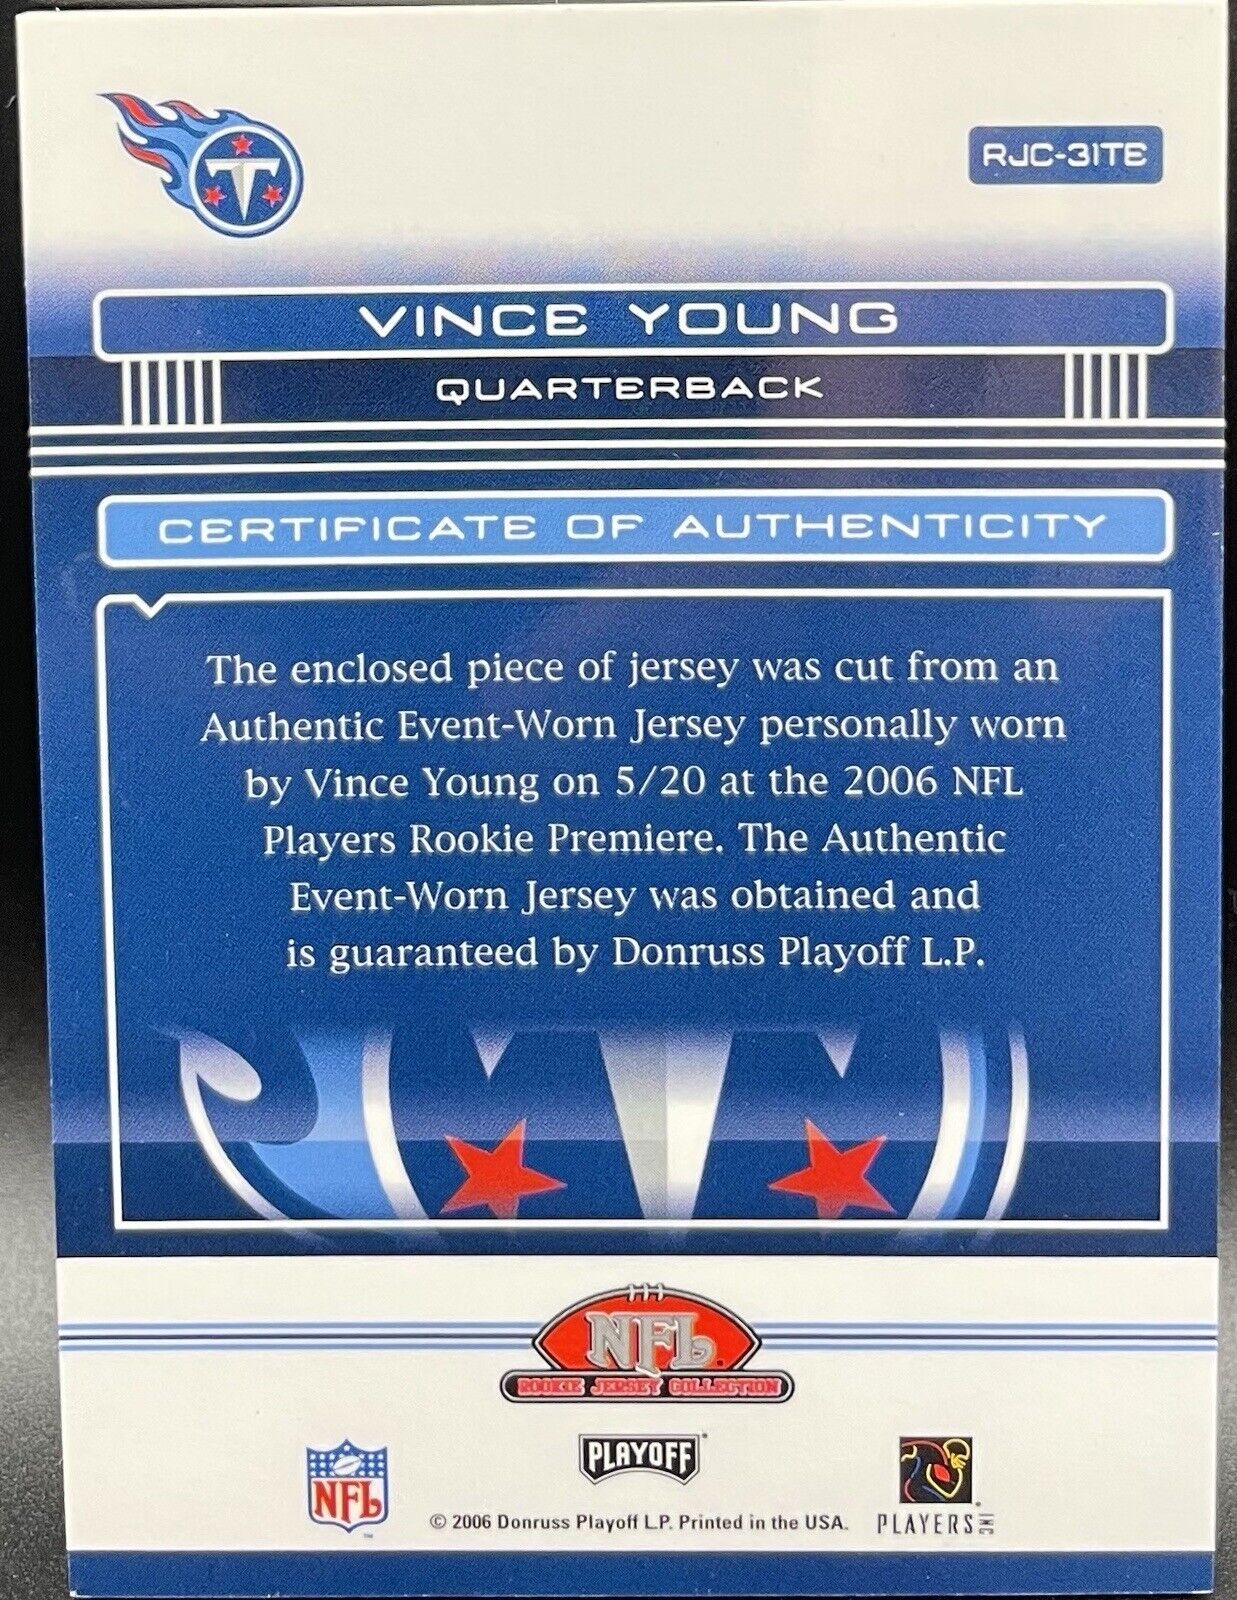 Vince Young 2006 Donruss Absolute ##RJC-3ITE Patch Tennessee Titans￼